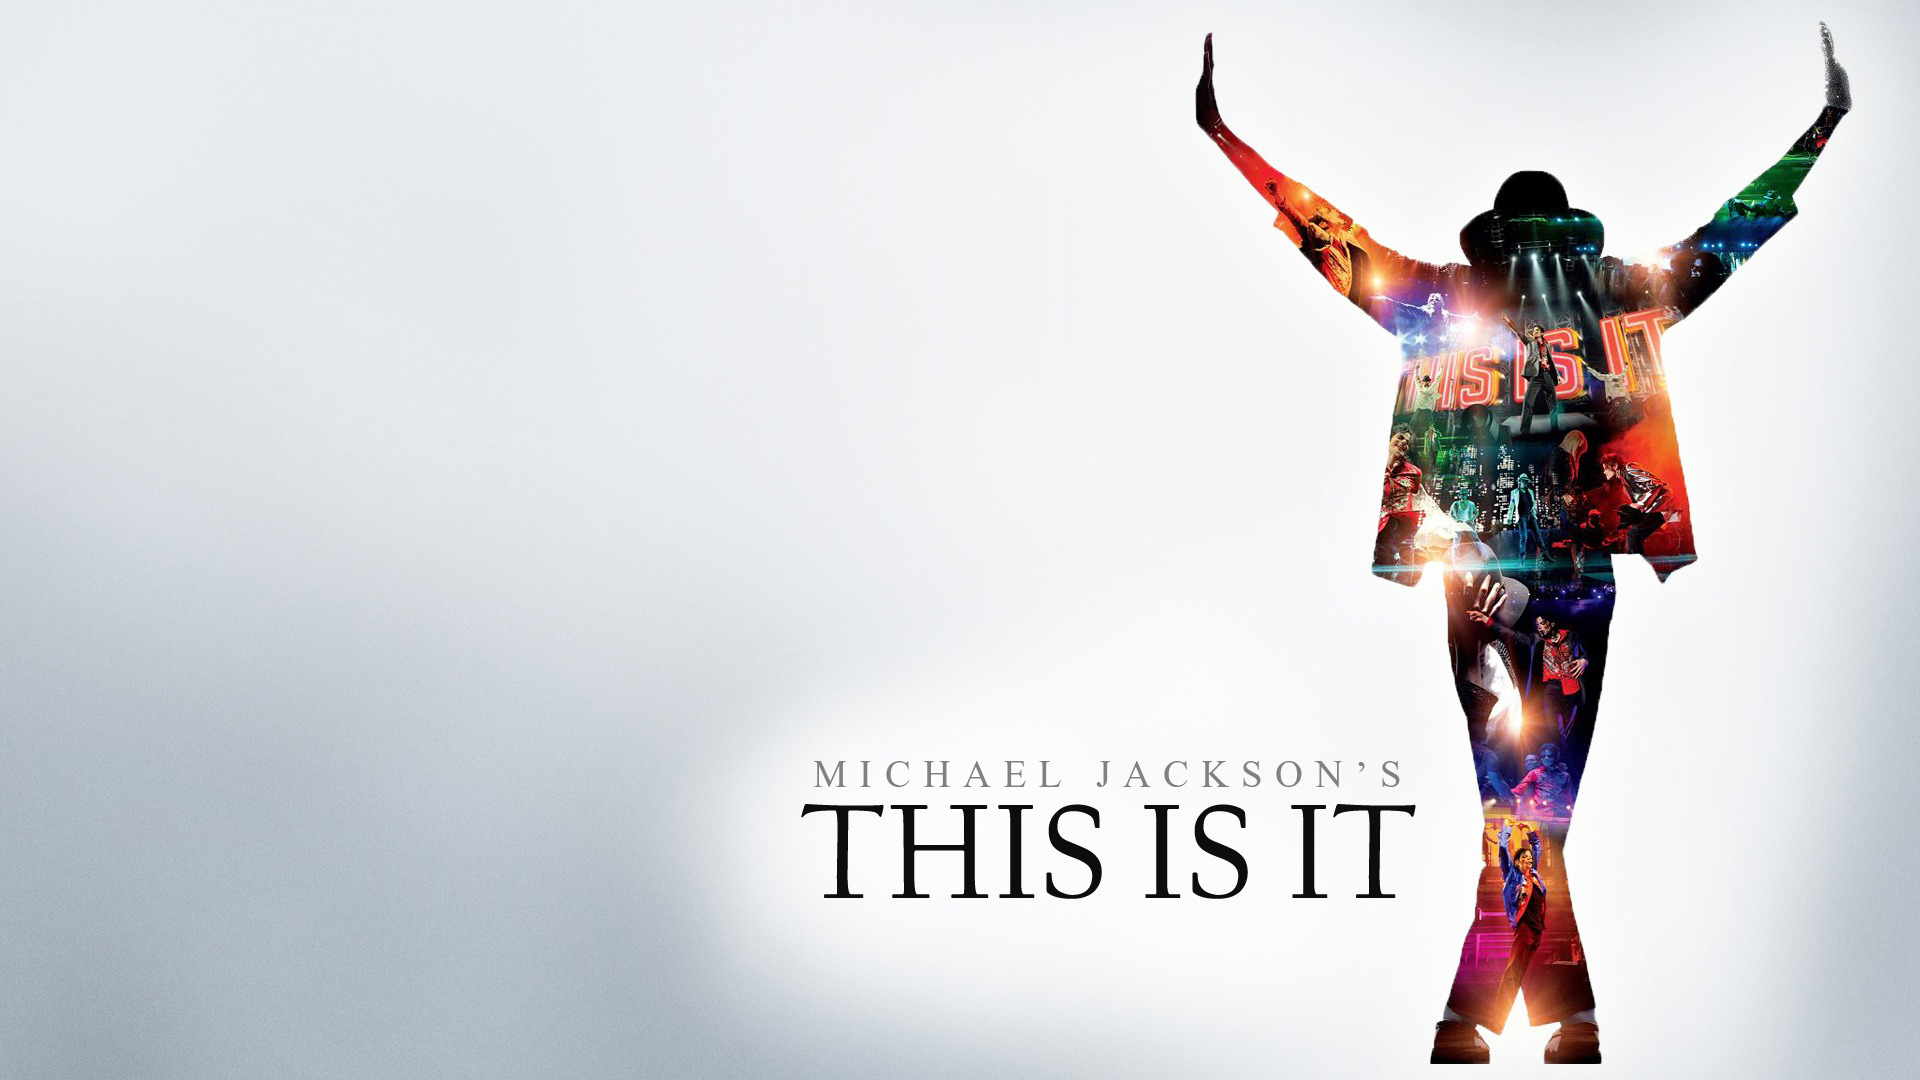 Michael Jackson Is On Side With White Wallpaper HD Michael Jackson